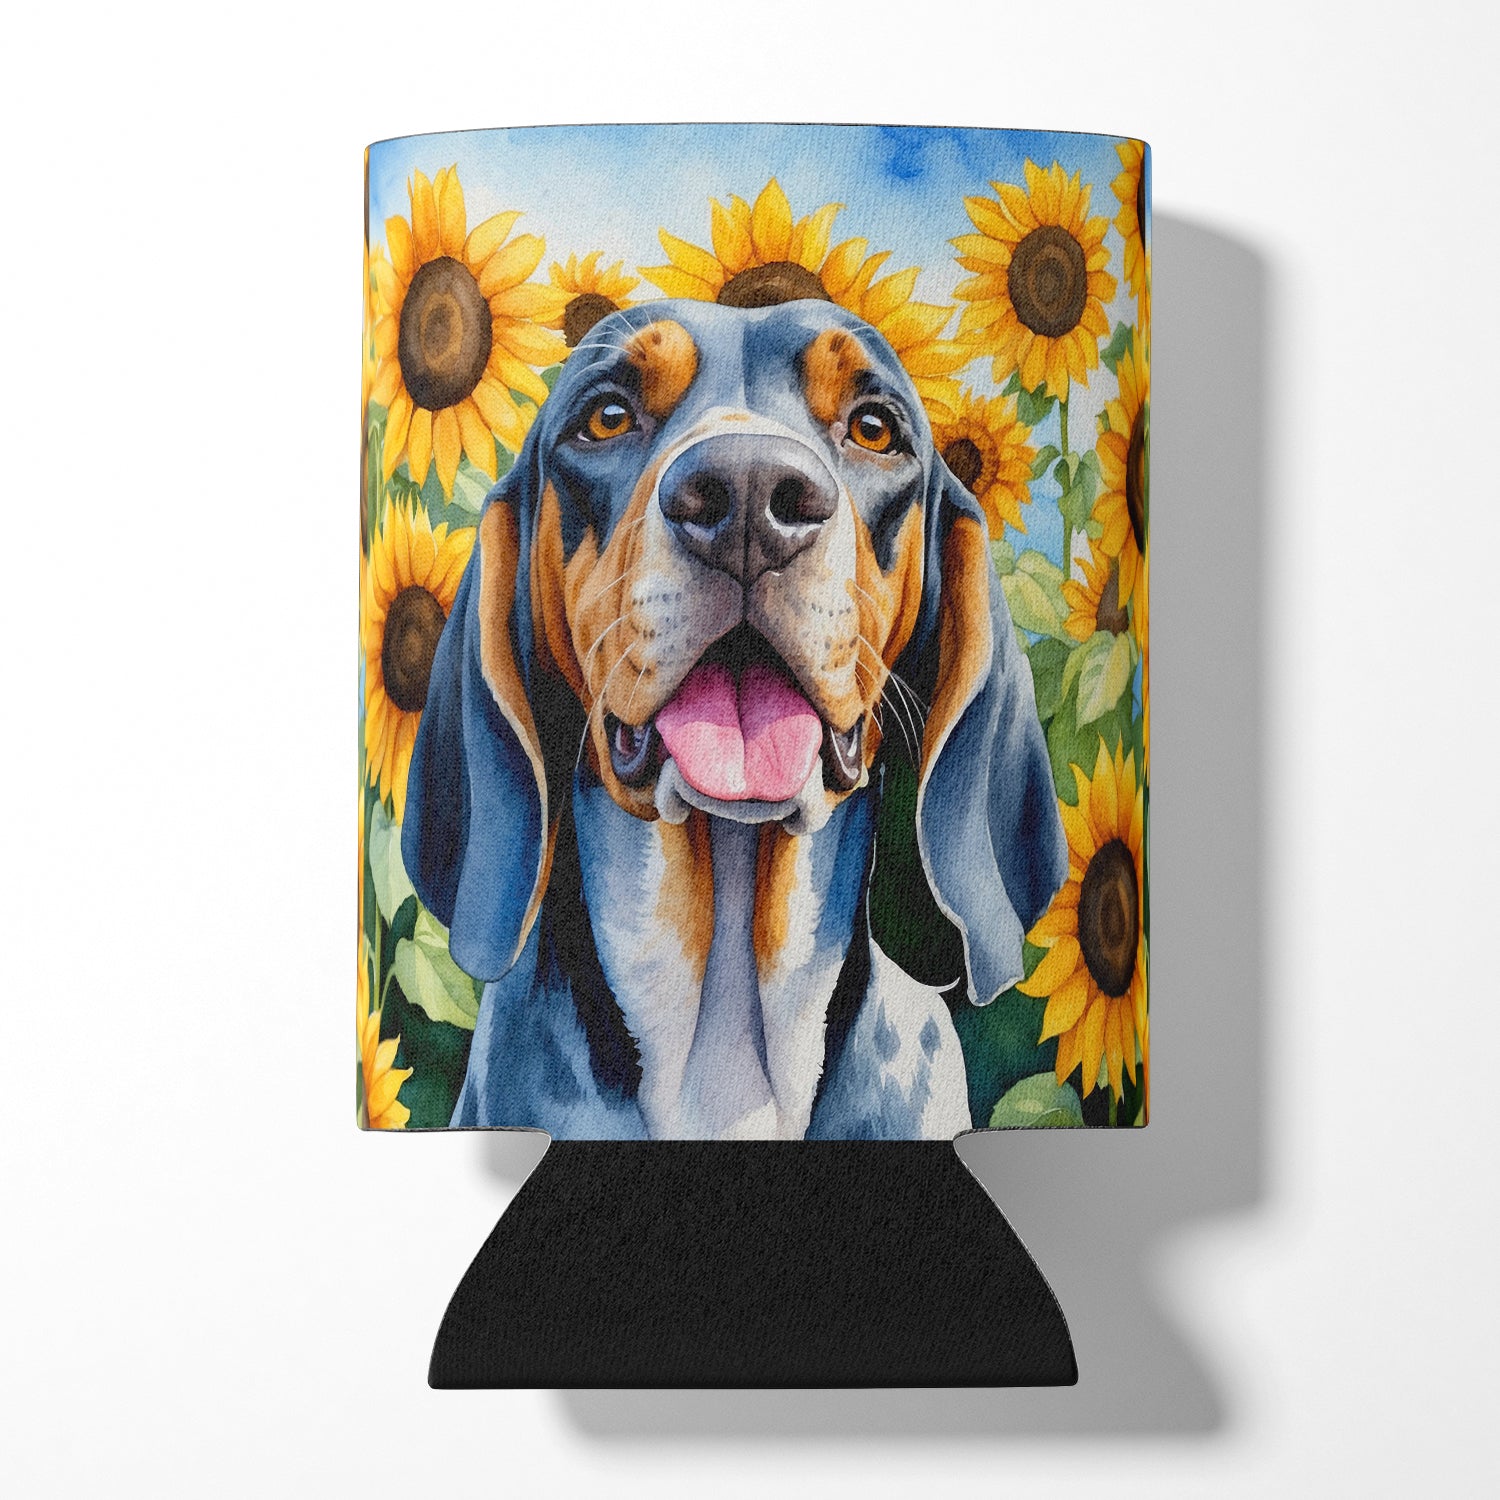 Buy this American English Coonhound in Sunflowers Can or Bottle Hugger